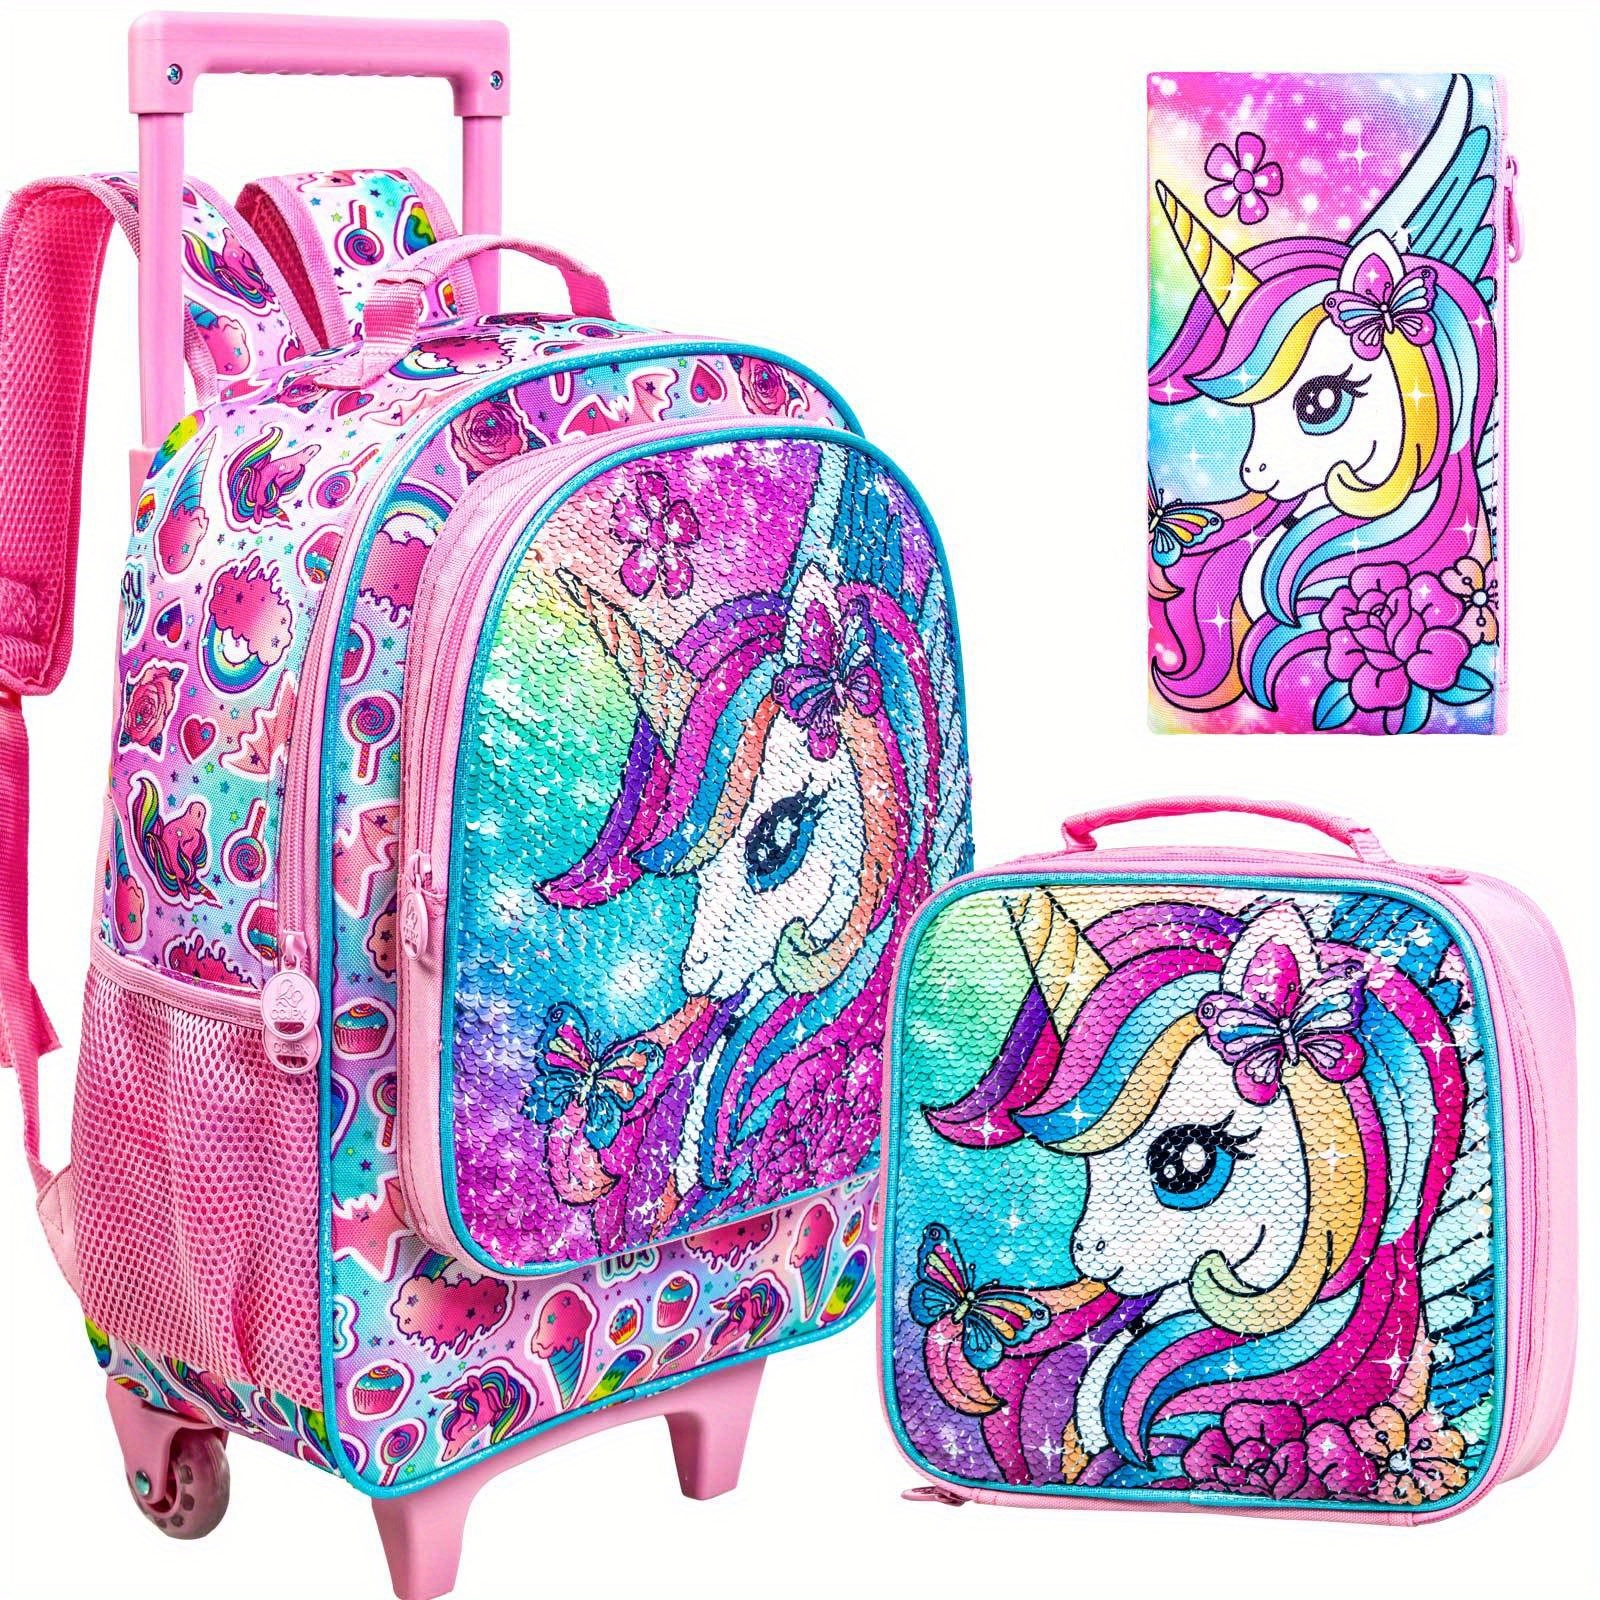 Toddler Backpack for Girls and Boys with Kids Lunch Bag - Unicorn